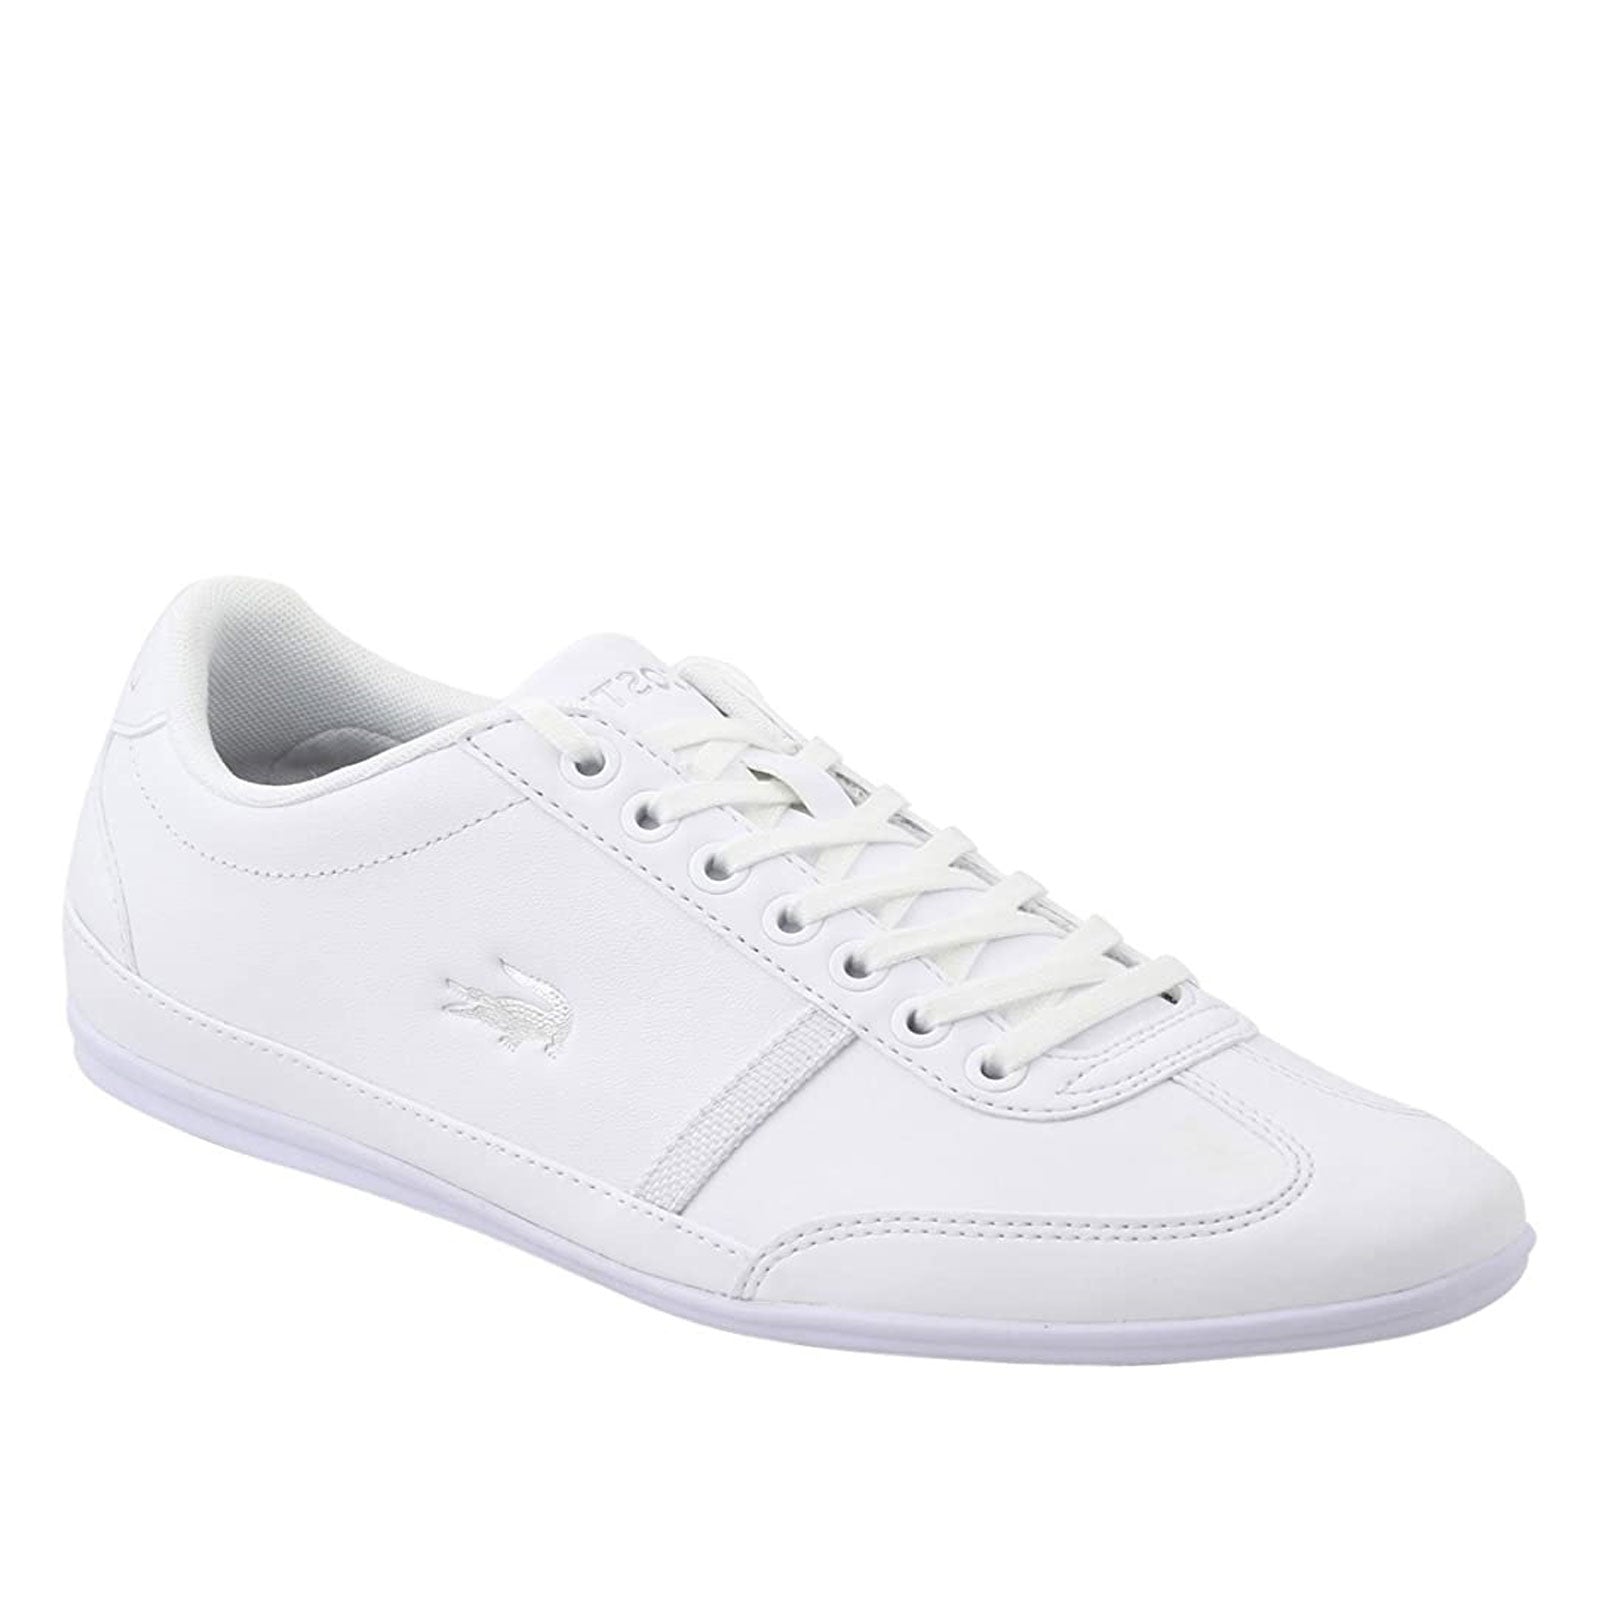 Lacoste Misano Sport 118 35CAM013721G (White – Milano Shoes